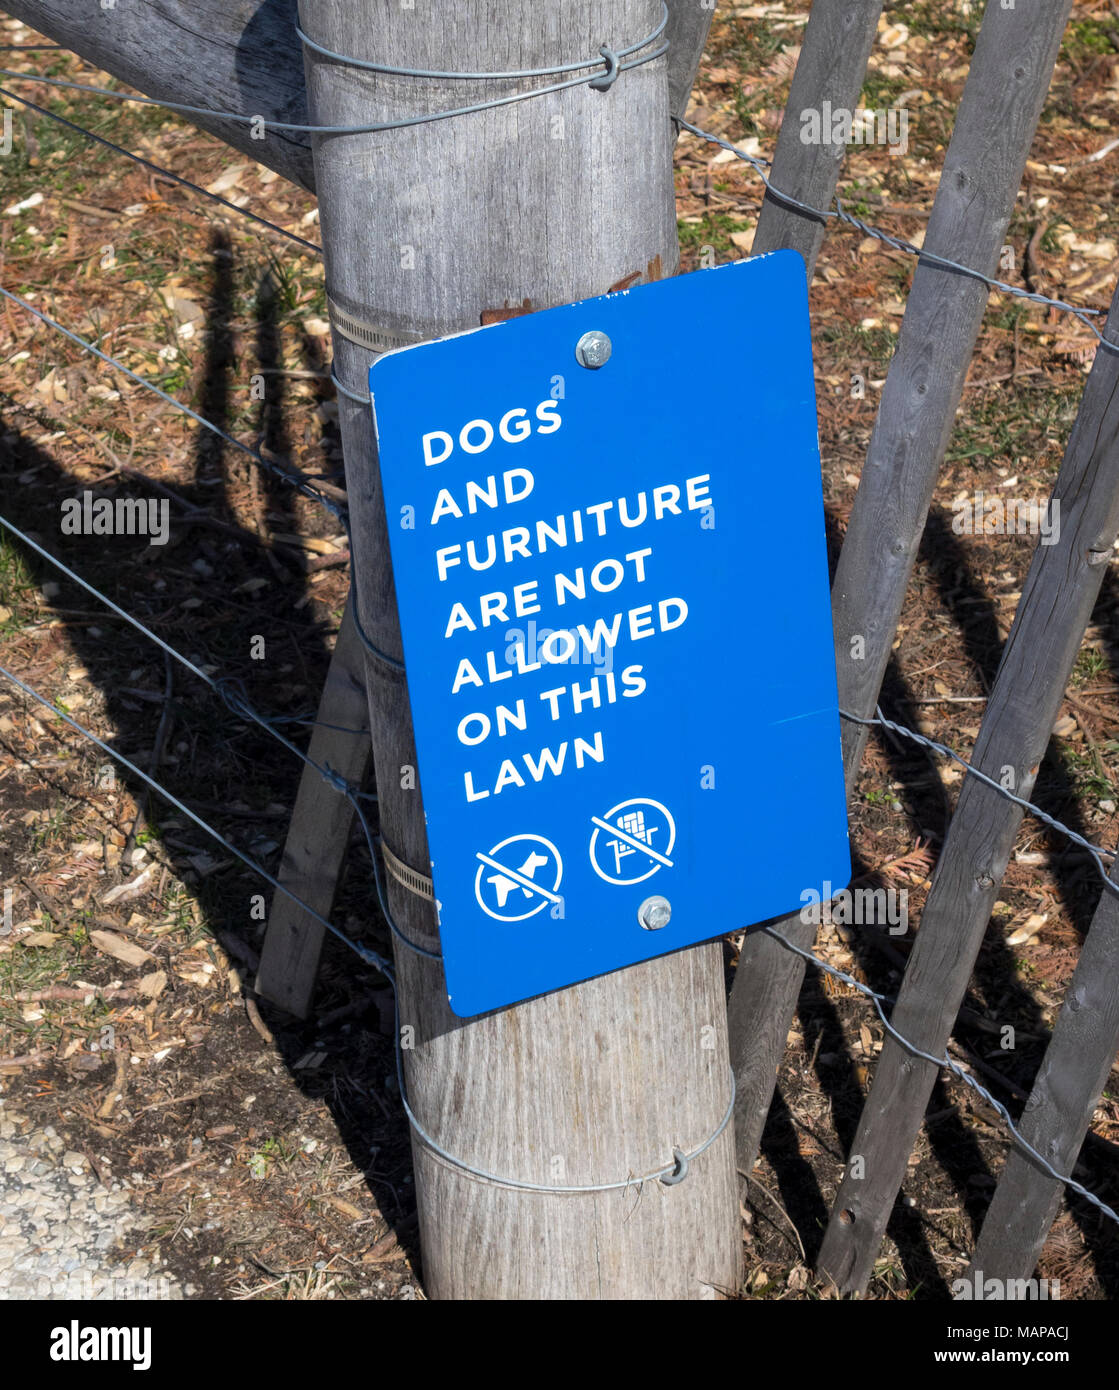 A warning sign in a New York City park Stock Photo